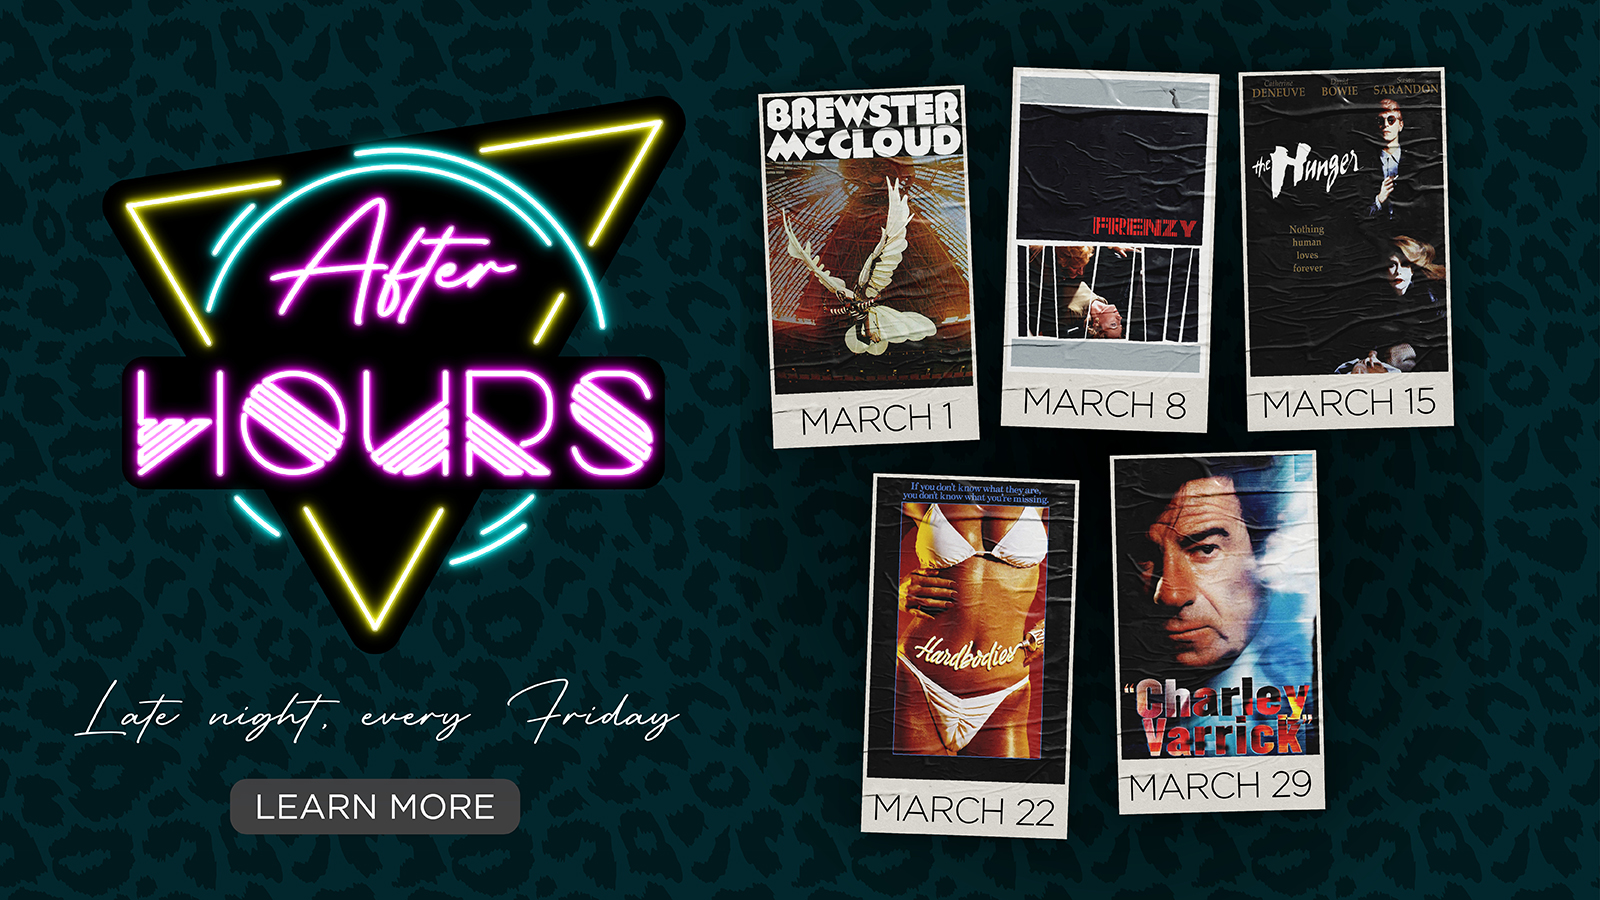 After Hours - Late night, every Friday. Learn More